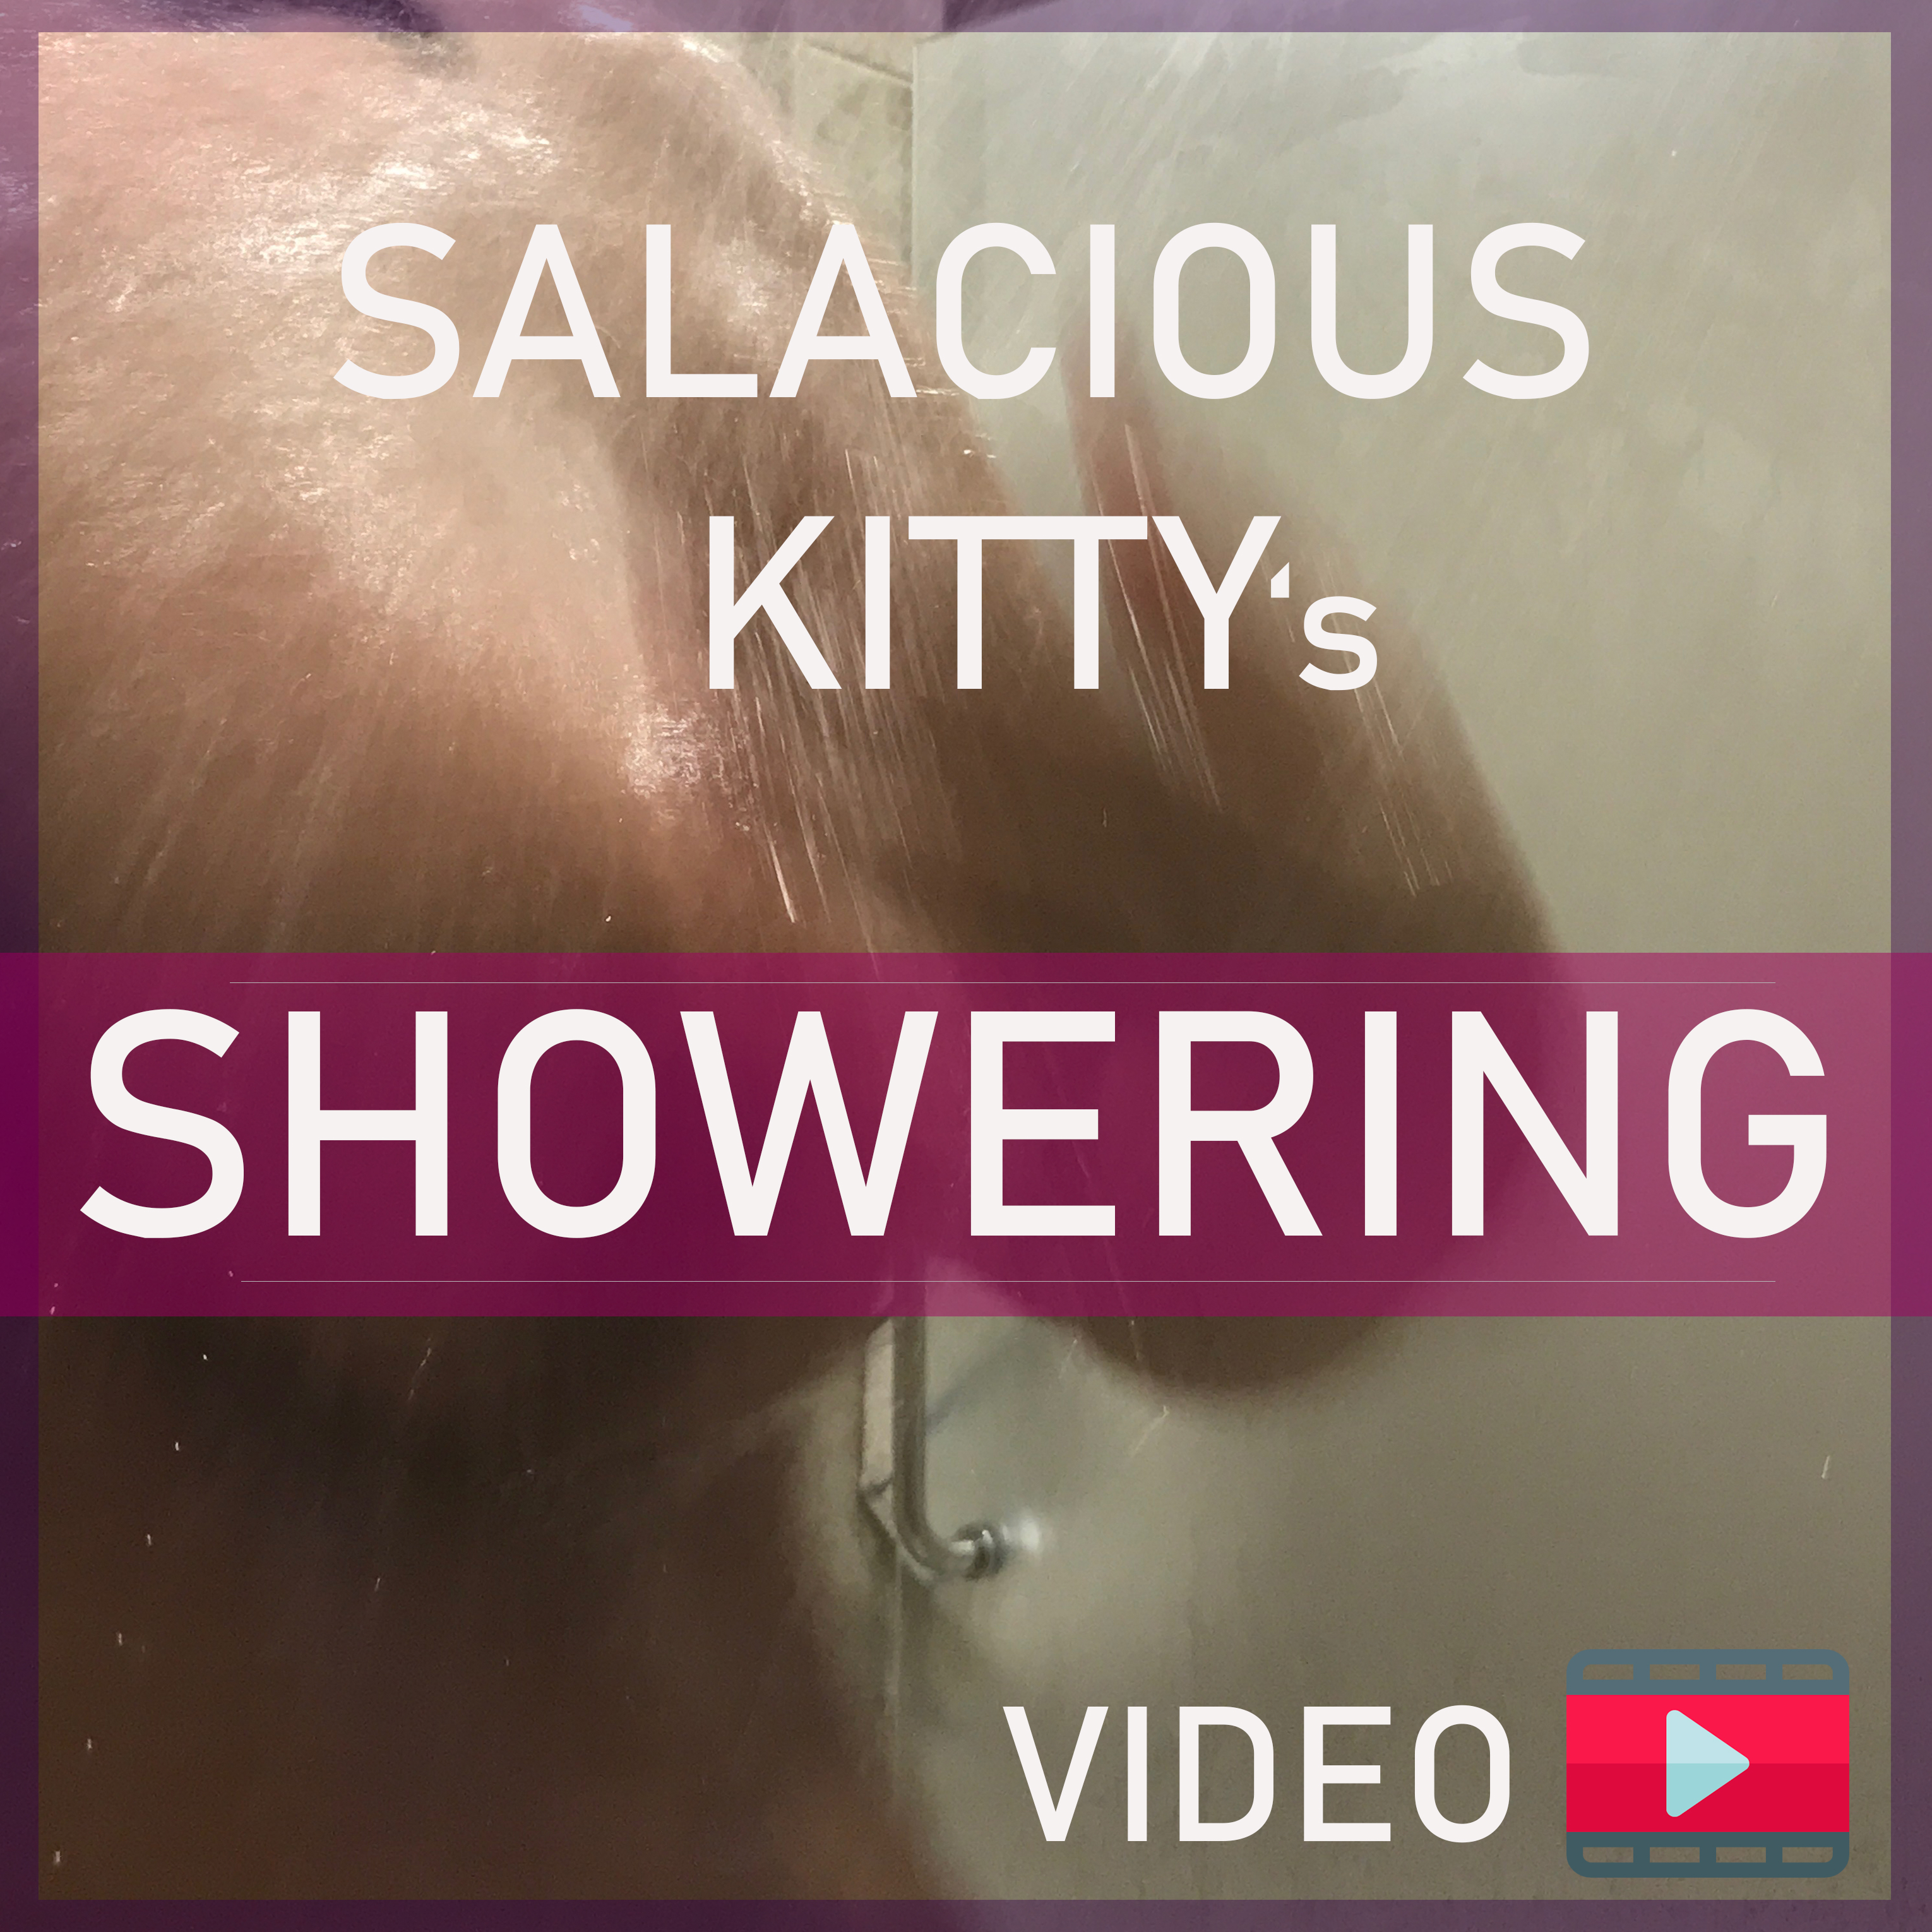 Hot steamy shower video and pics of Salcious Kitty Kayla a beautiful voluptuous lady, BBW